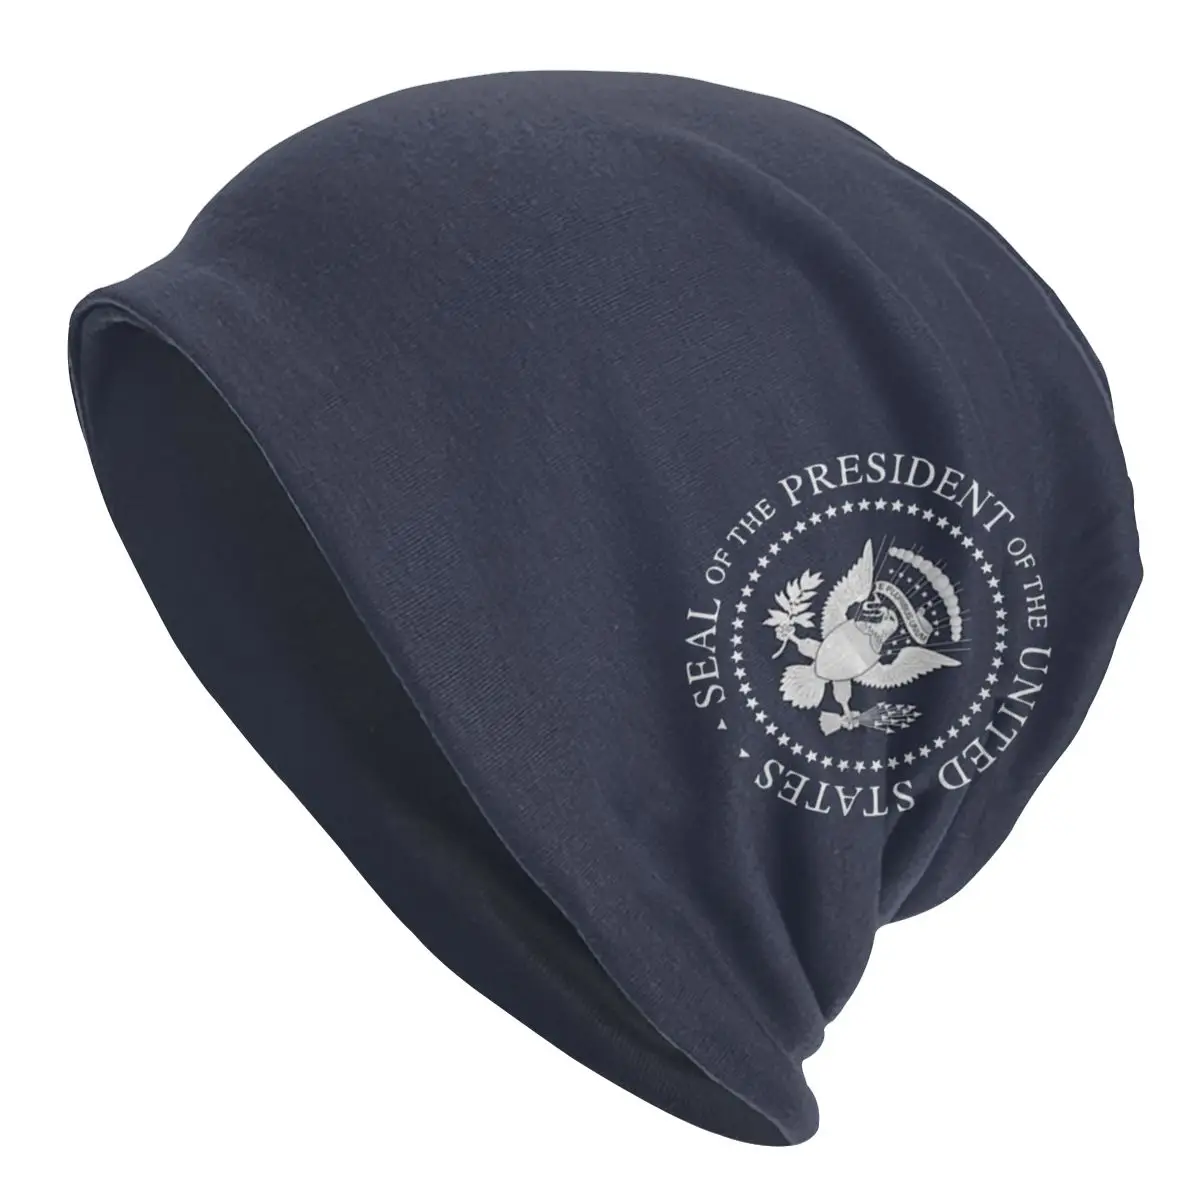 

Presidential Seal Skullies Beanies USA Trump Election Vote Hat Casual Street Unisex Caps Warm Multifunction Bonnet Knitting Hats